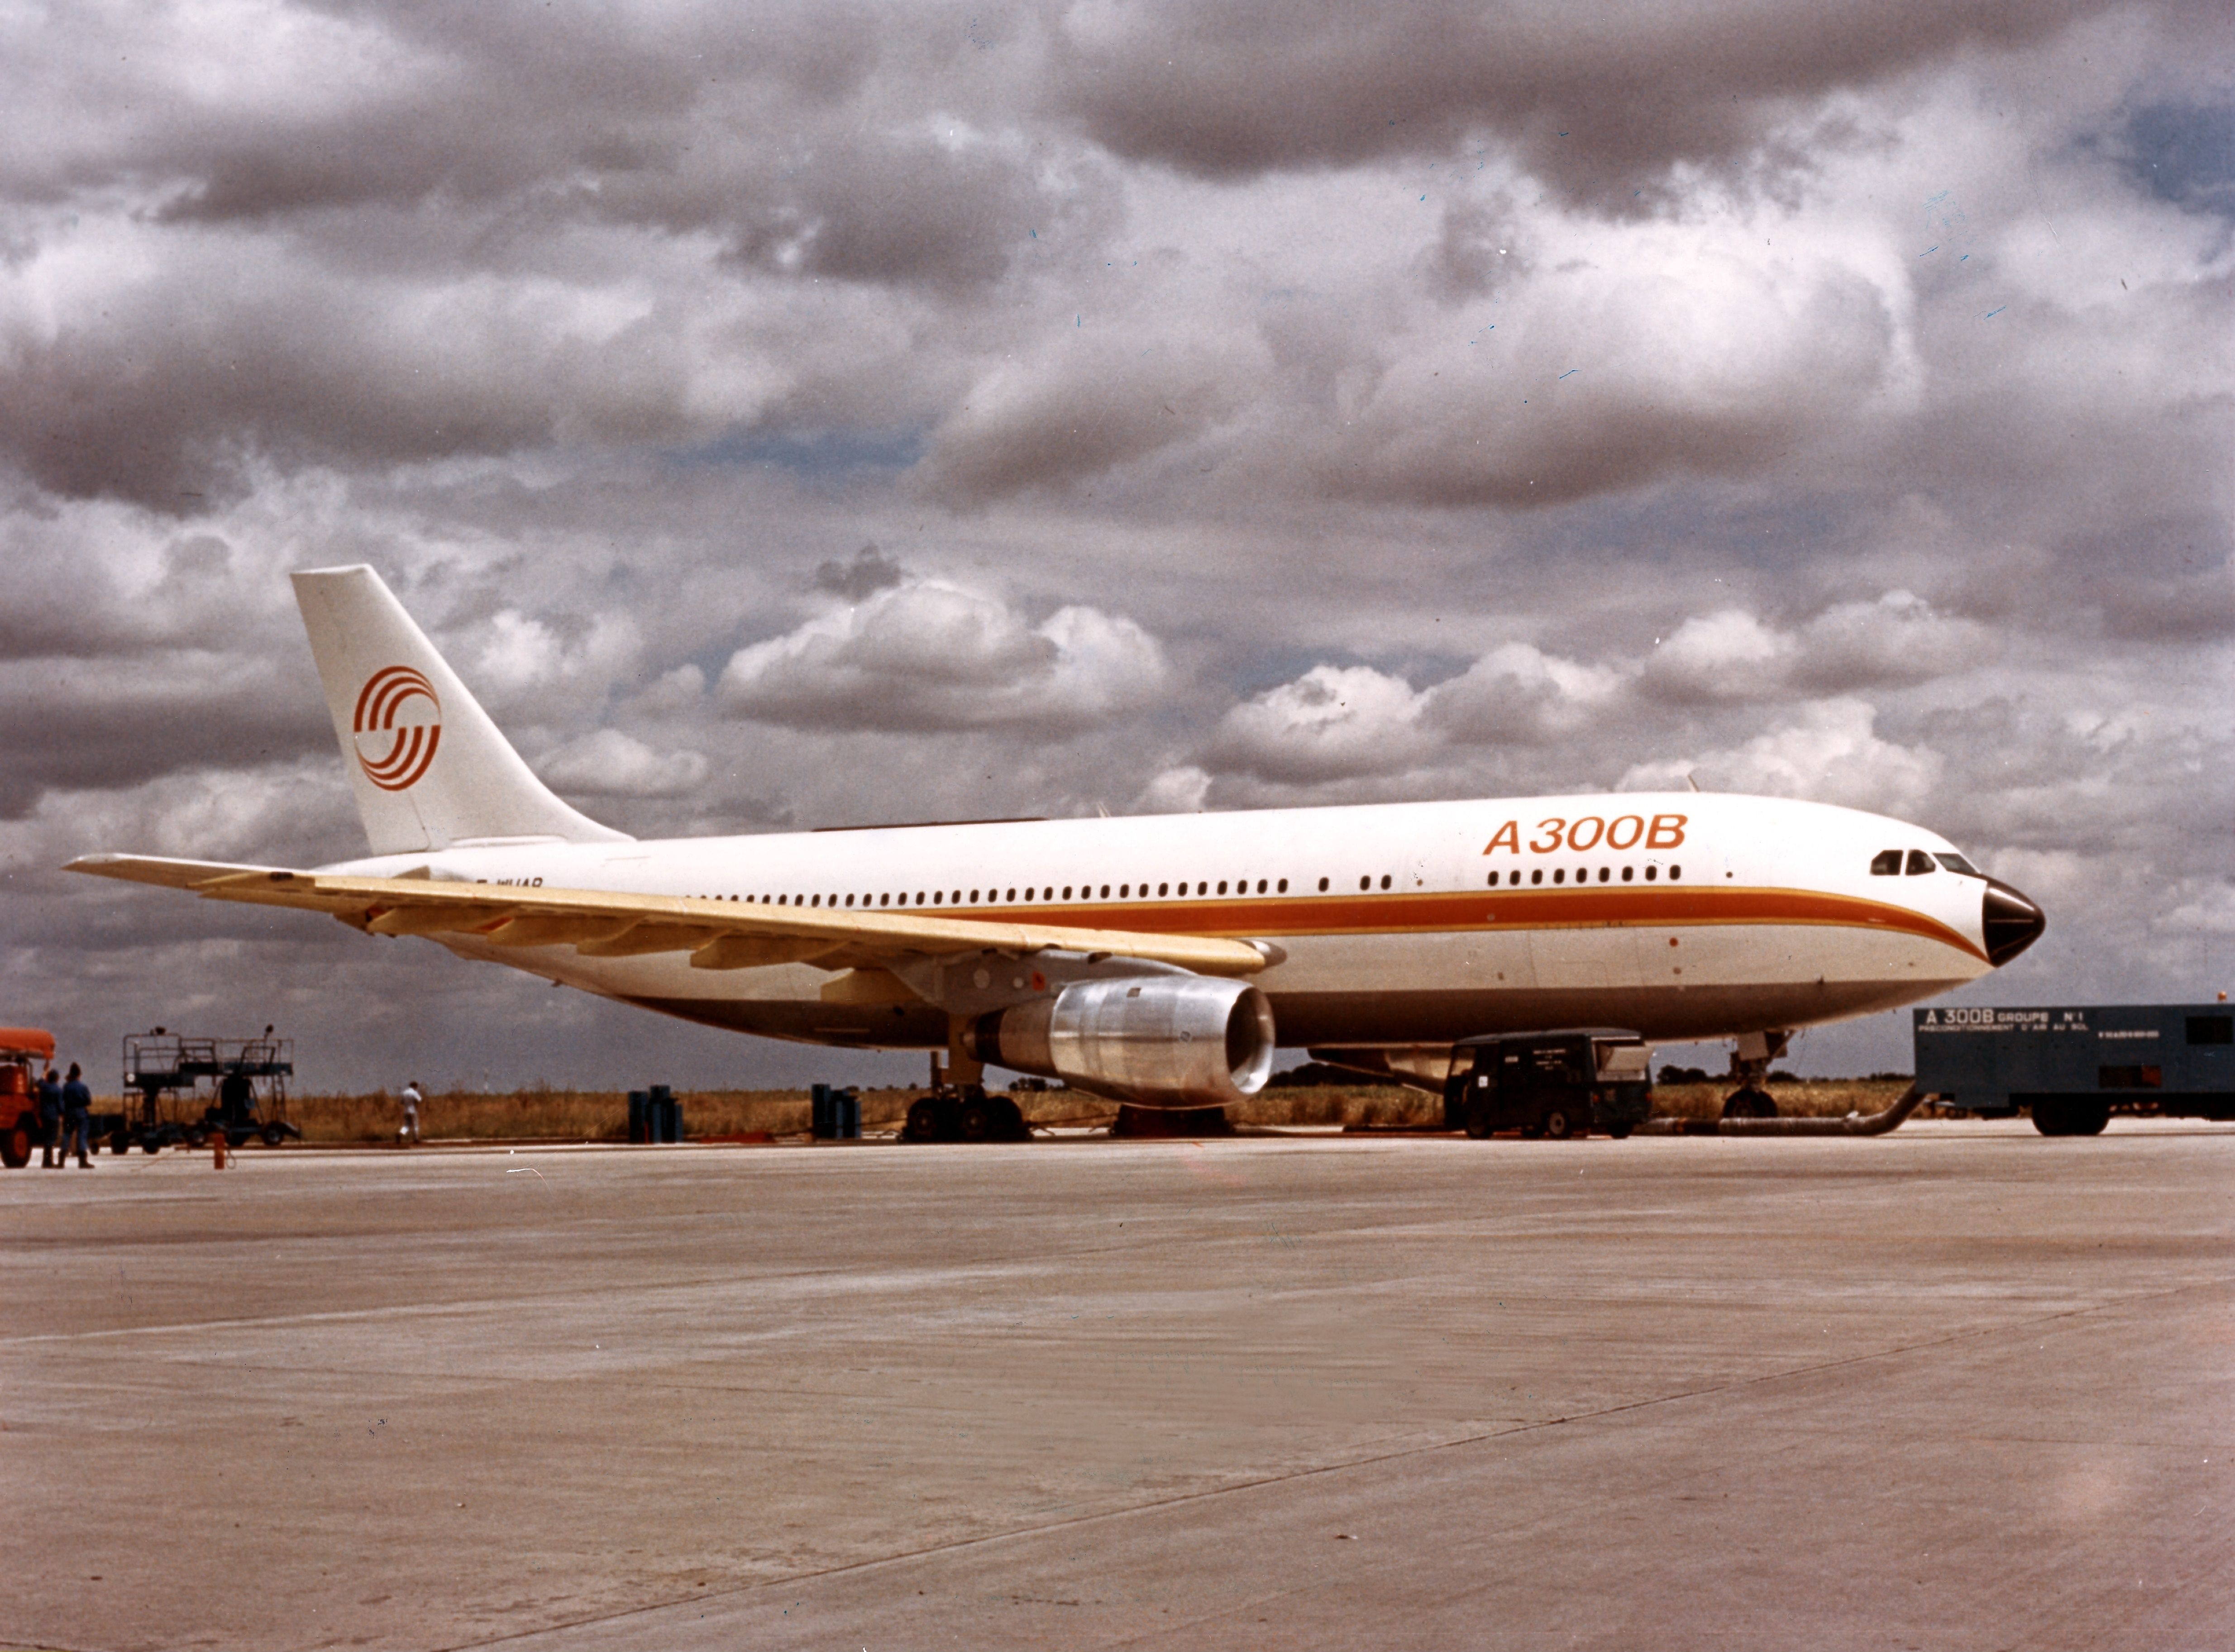 50 Years Ago Today The Airbus A300 Made Its First Flight